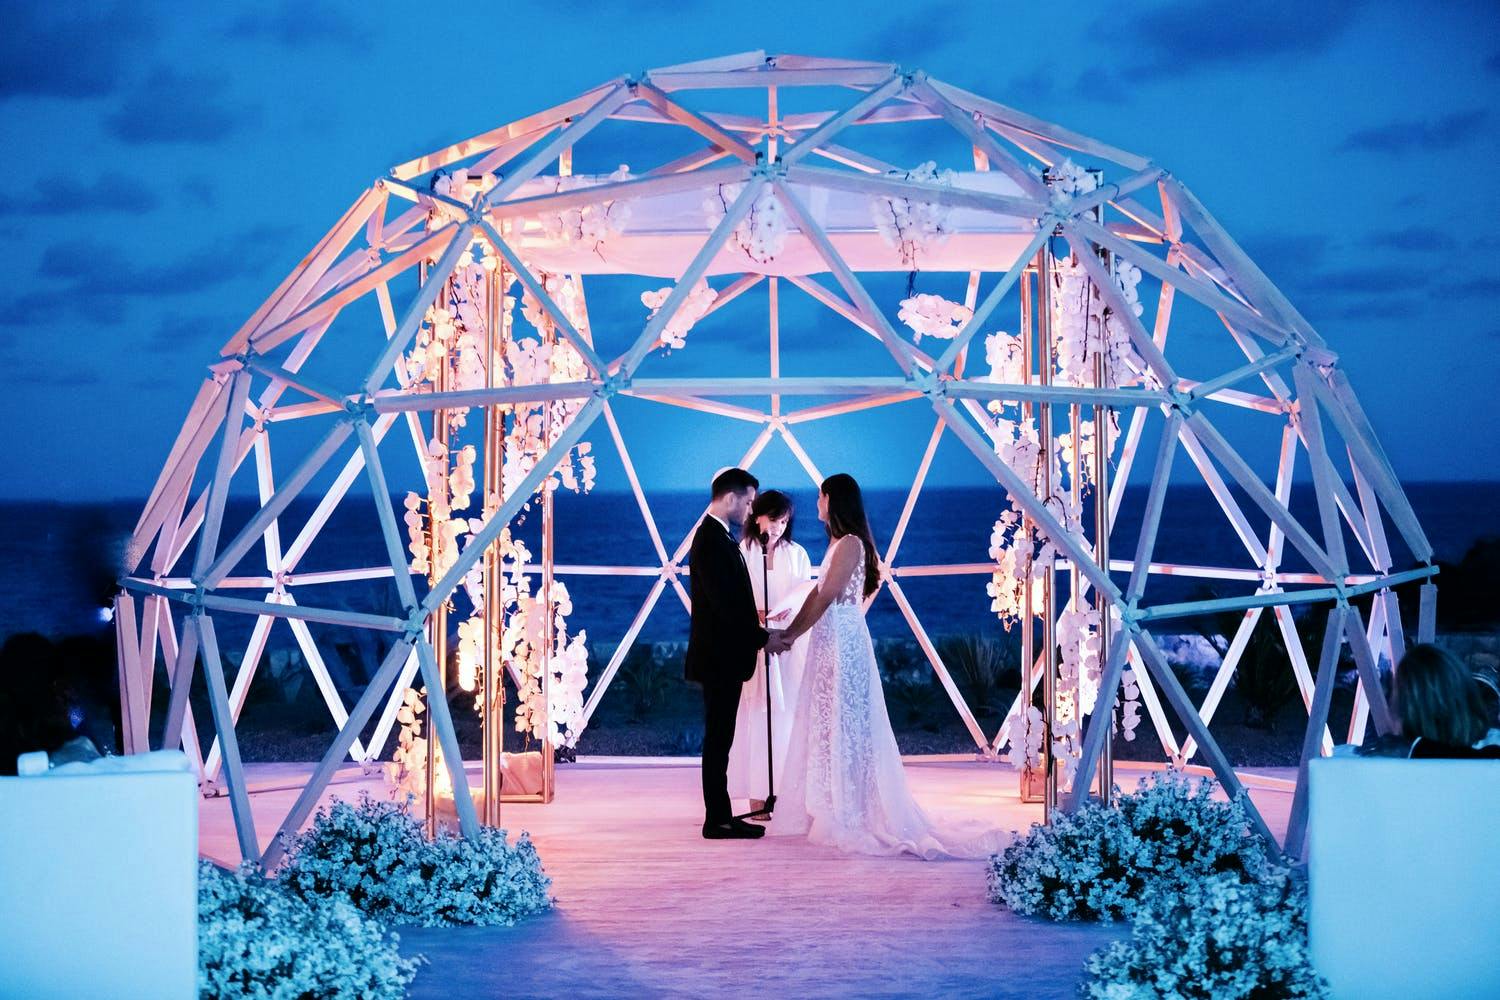 Couple exchange vows in a geometric wedding décor igloo-like structure | PartySlate